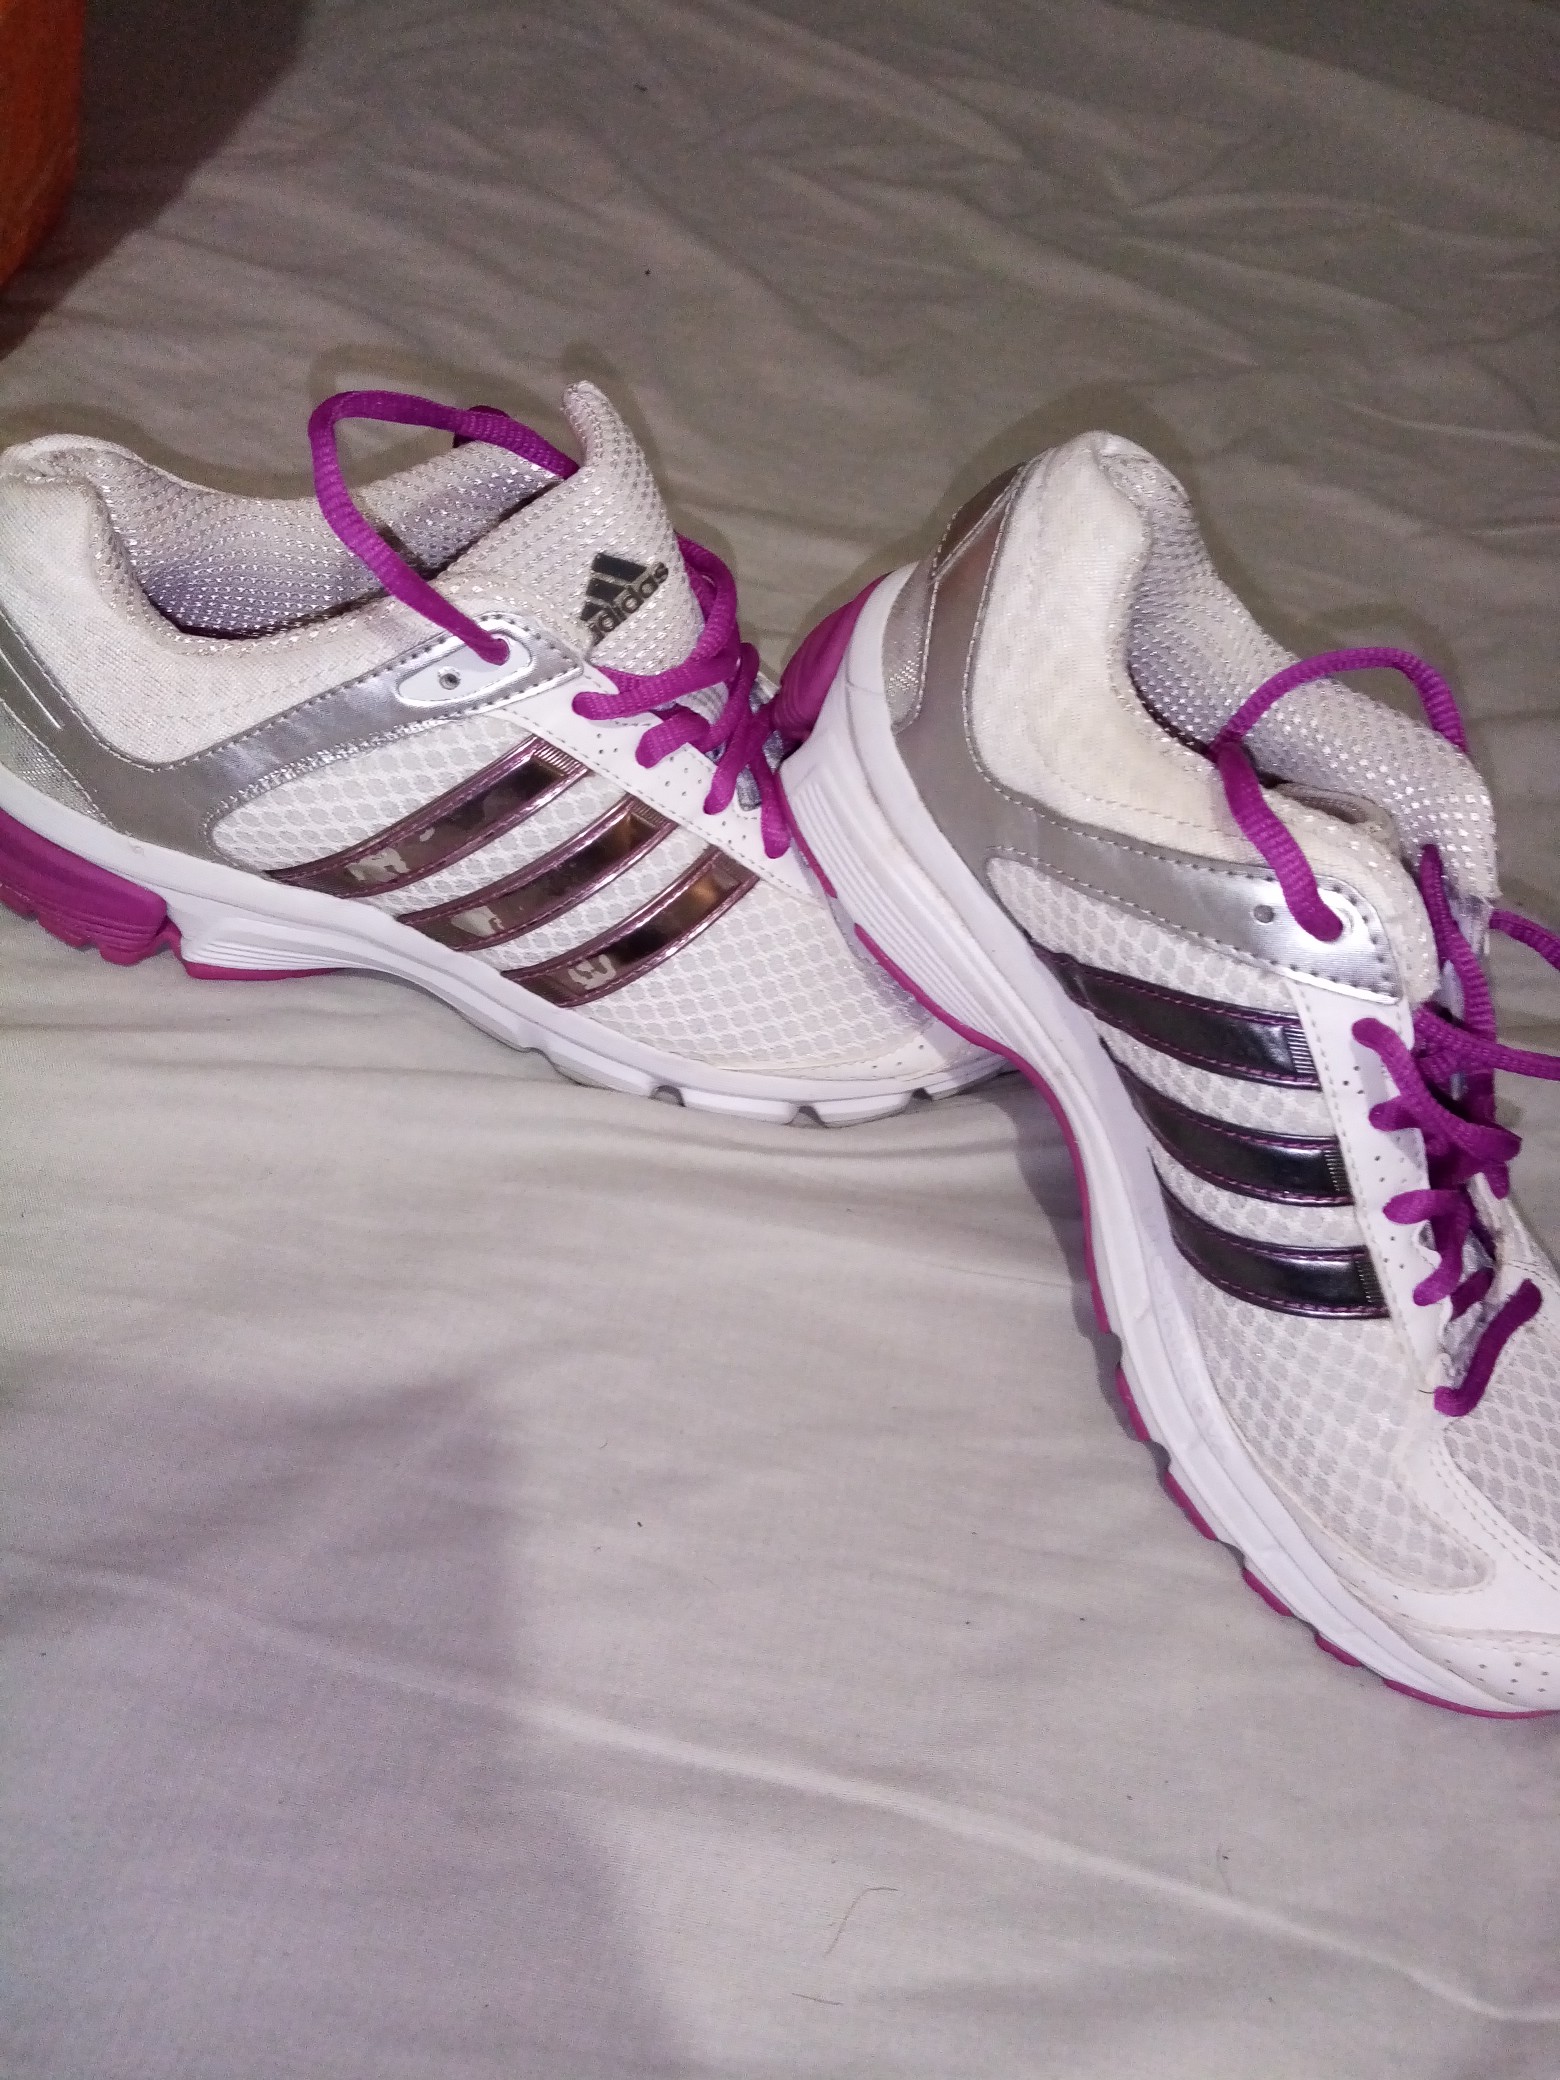 womens trainers size 5 sale